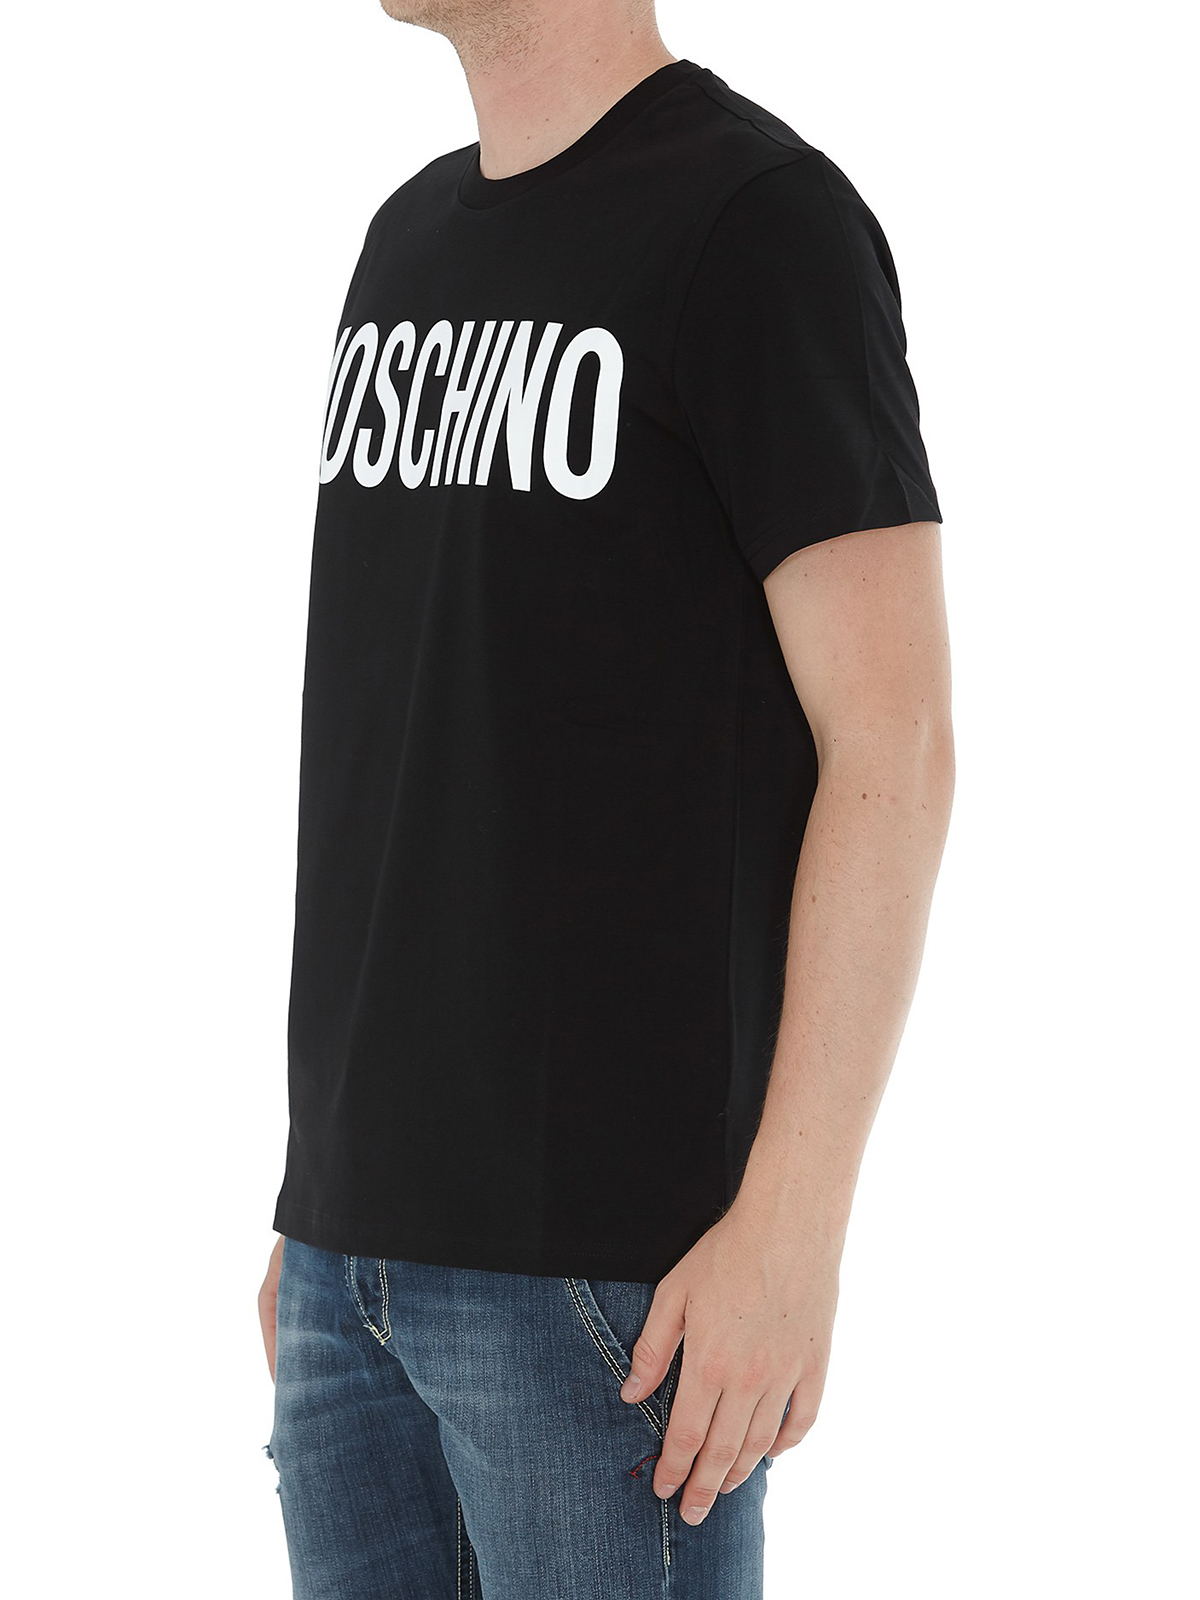 Tシャツ Moschino - Tシャツ - 黒 - A070552401555 | iKRIX shop online